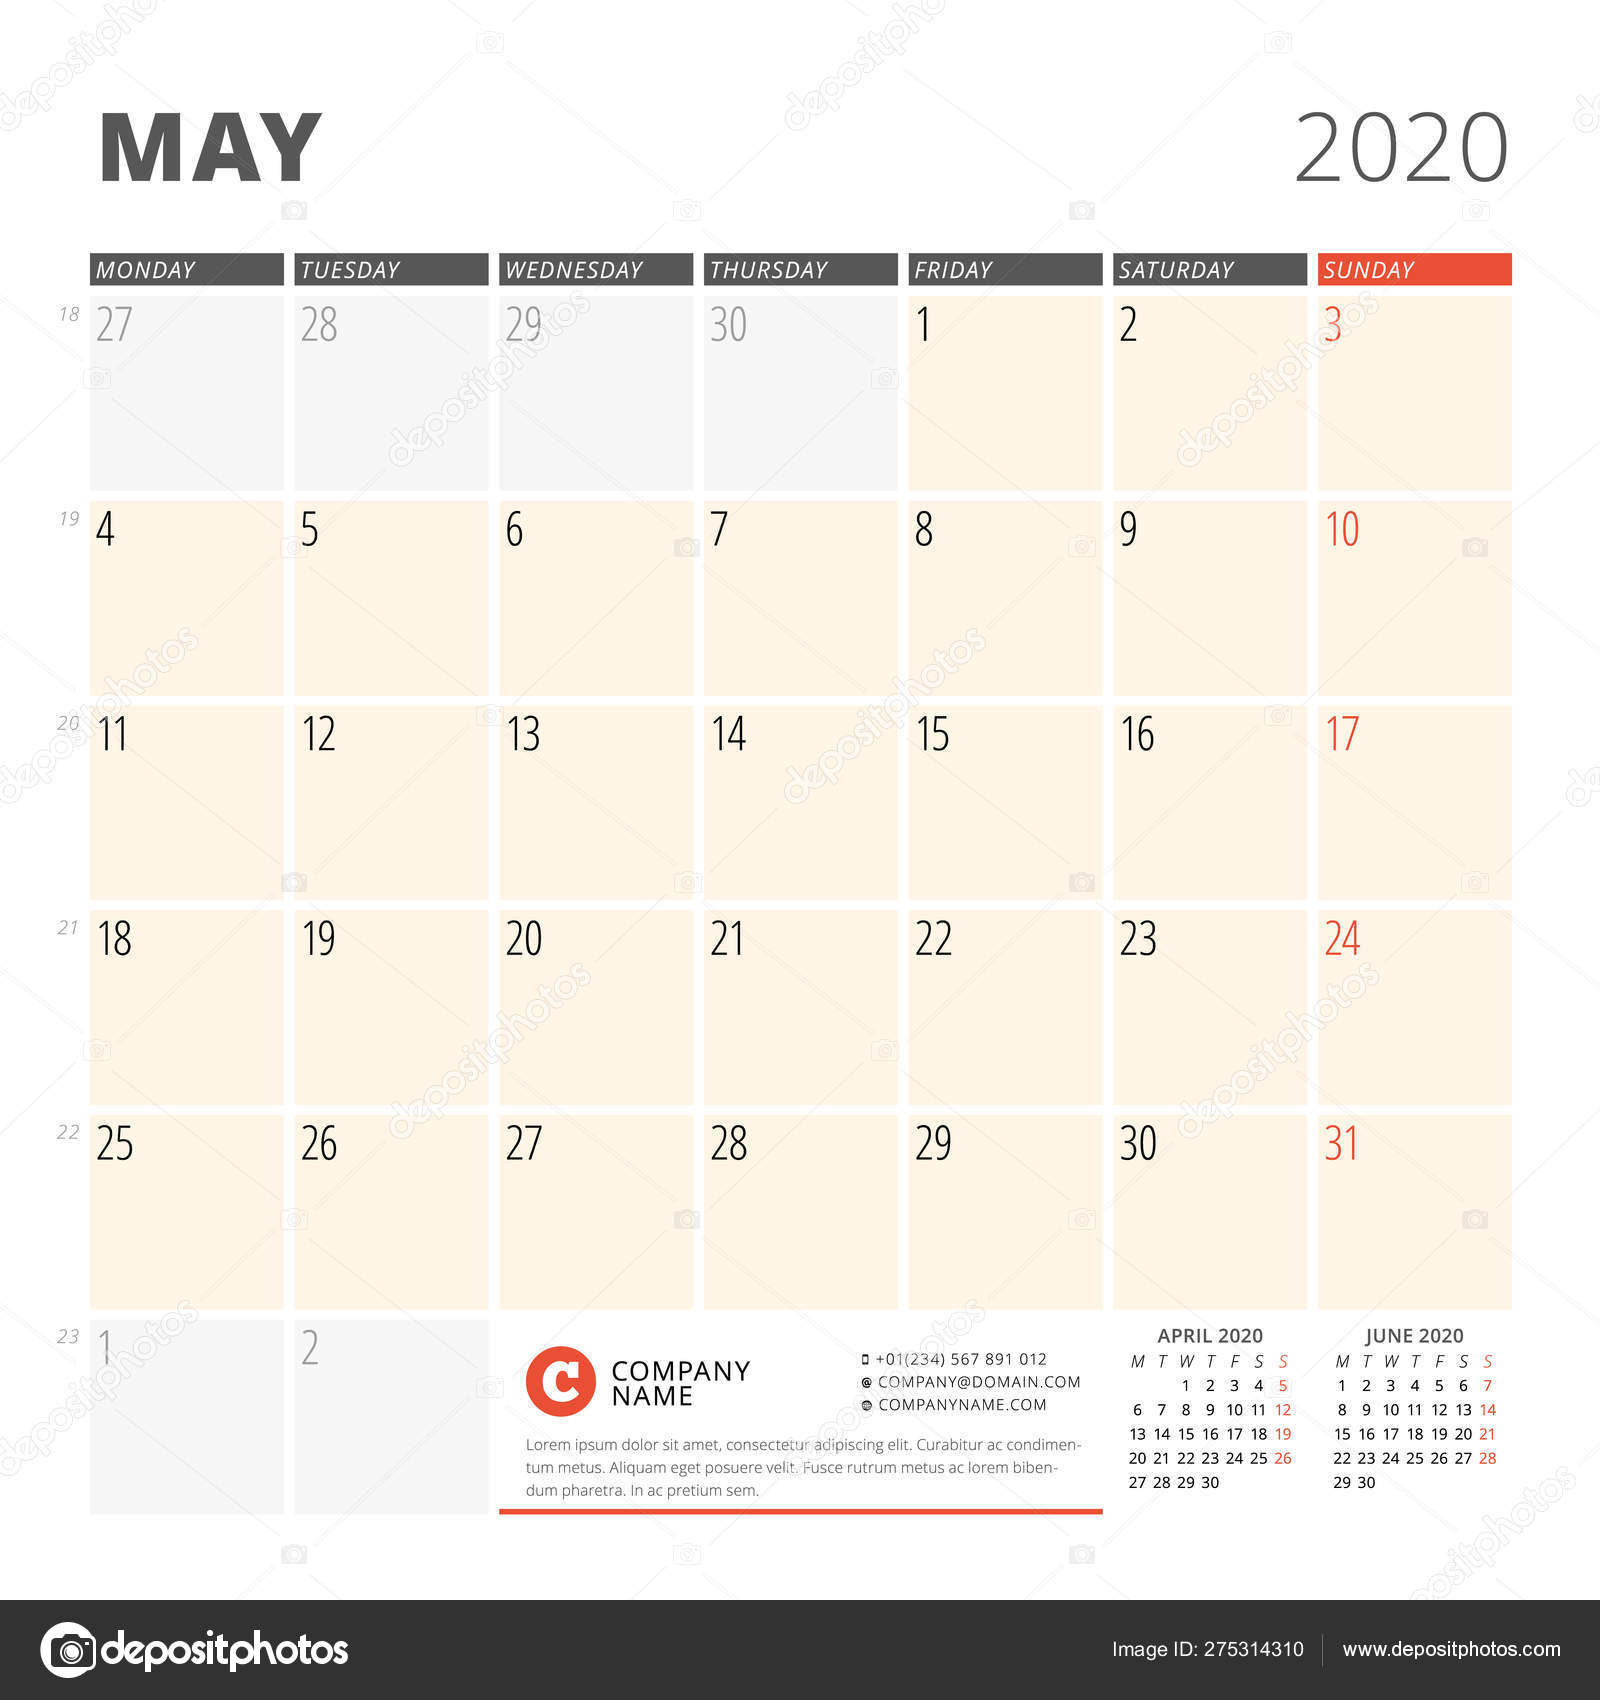 Calendar Planner For May 2020. Stationery Design Template